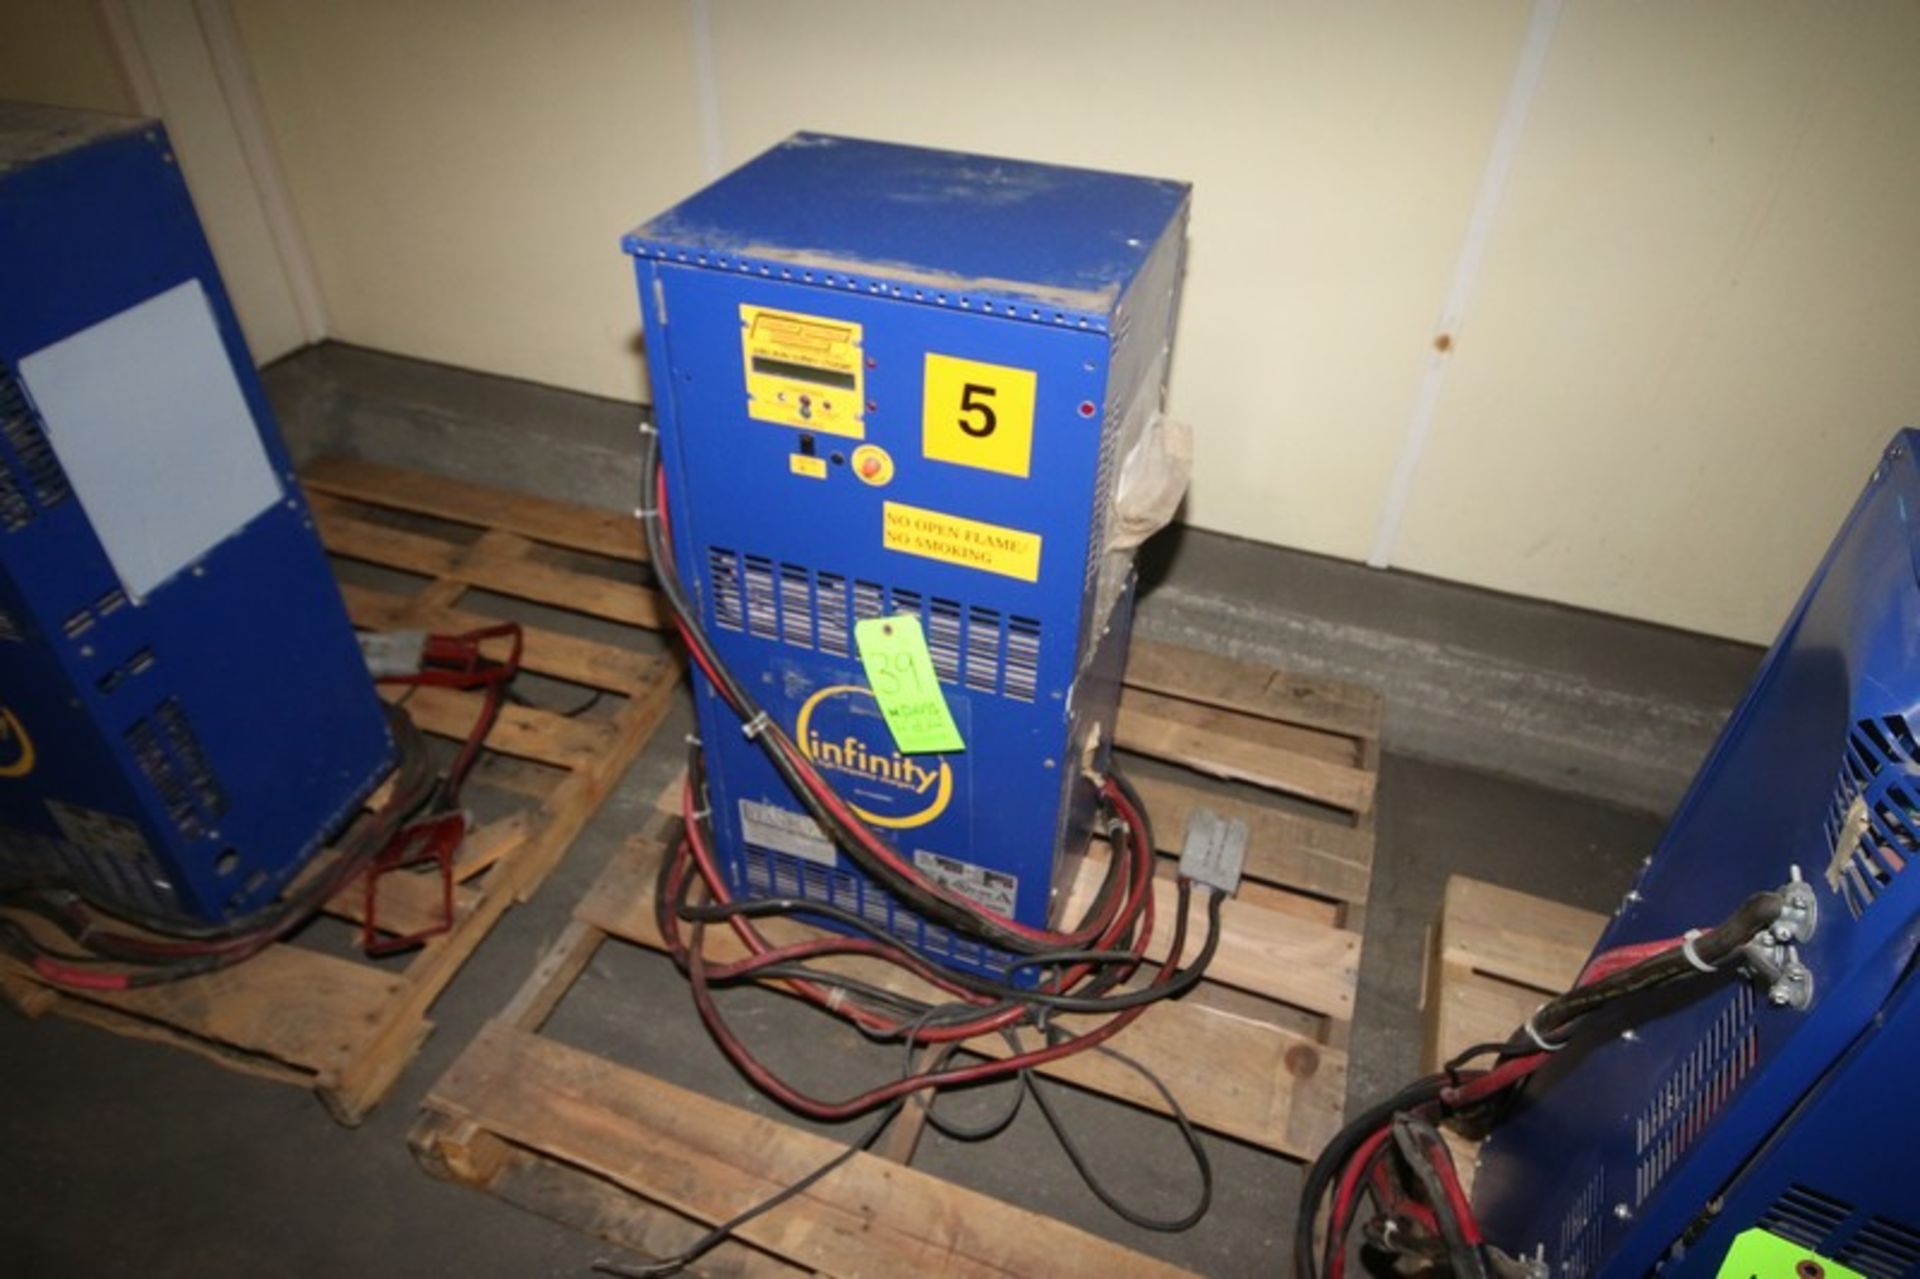 Infinity High Frequency Forklift Battery Charger, M/N FC18/13, S/N 2013010707, 480 Volts, 3 Phase,